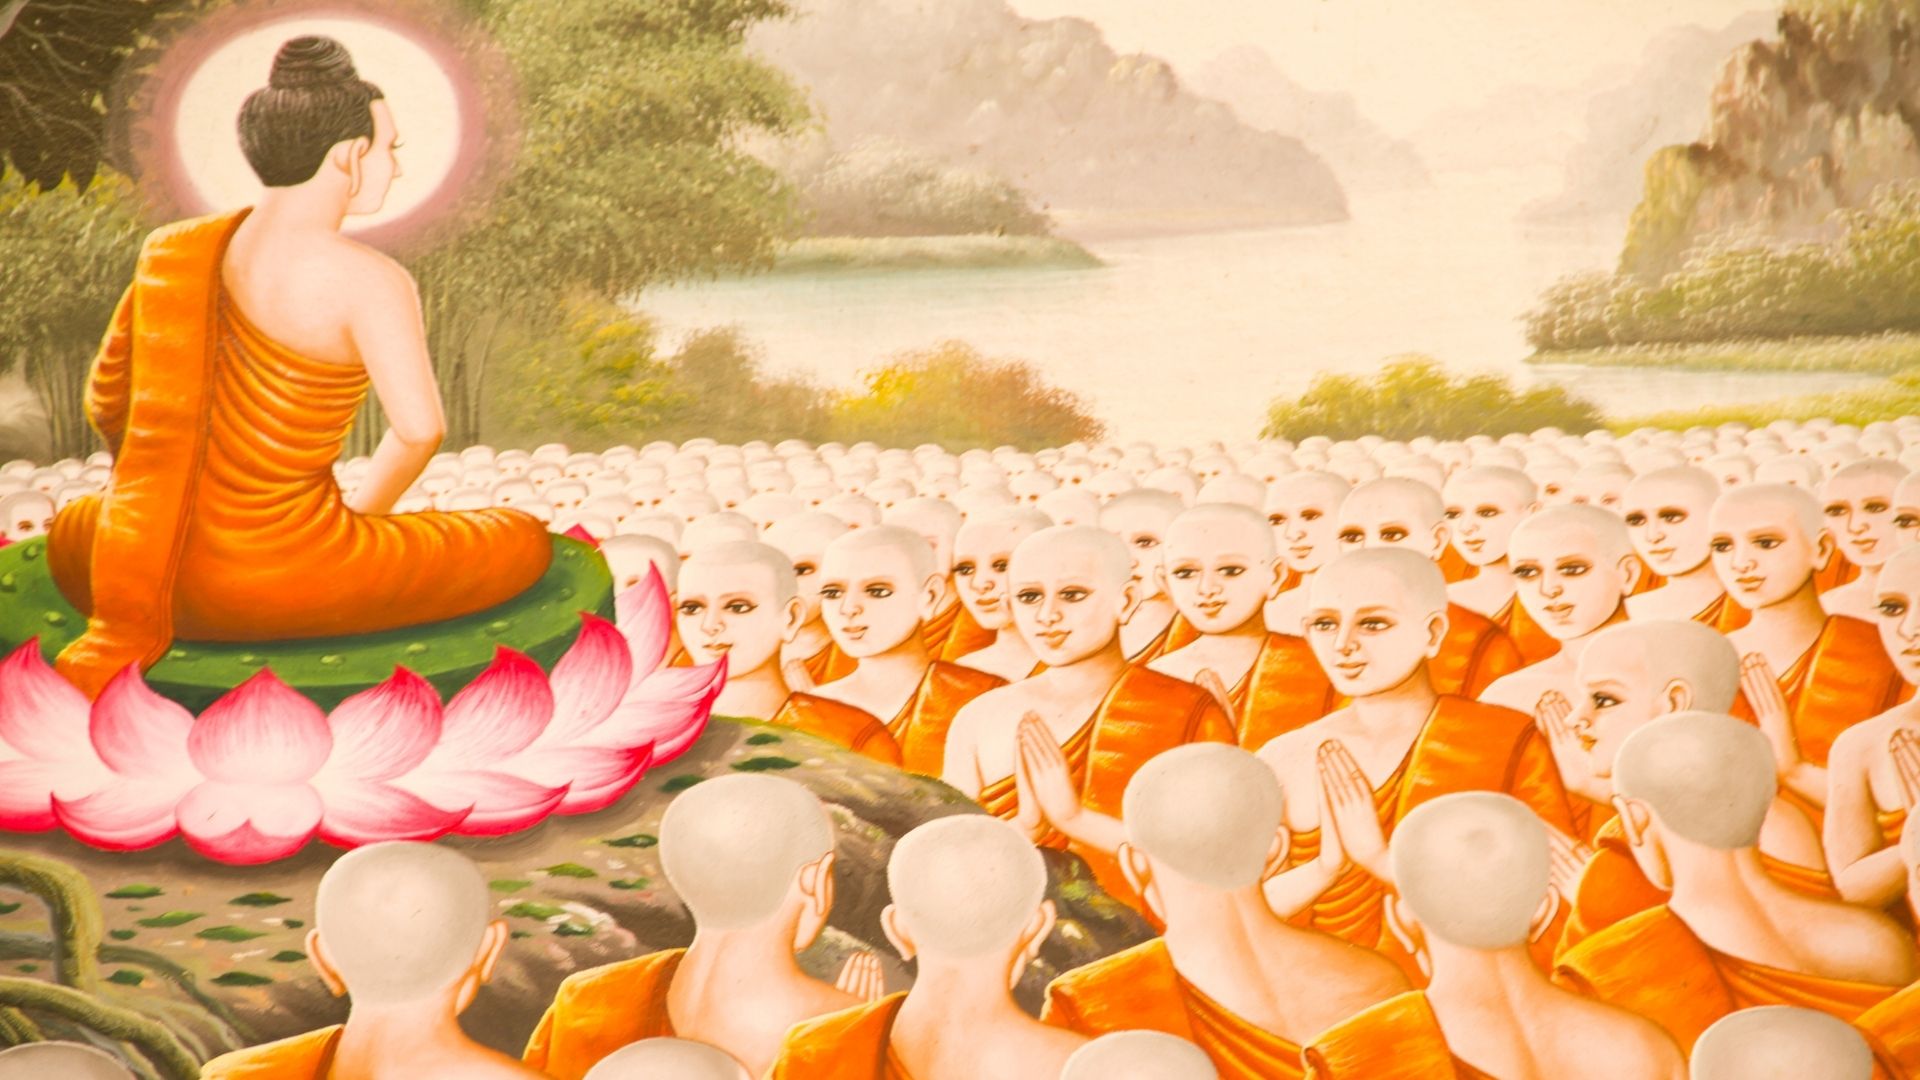 Magha Puja Wallpapers